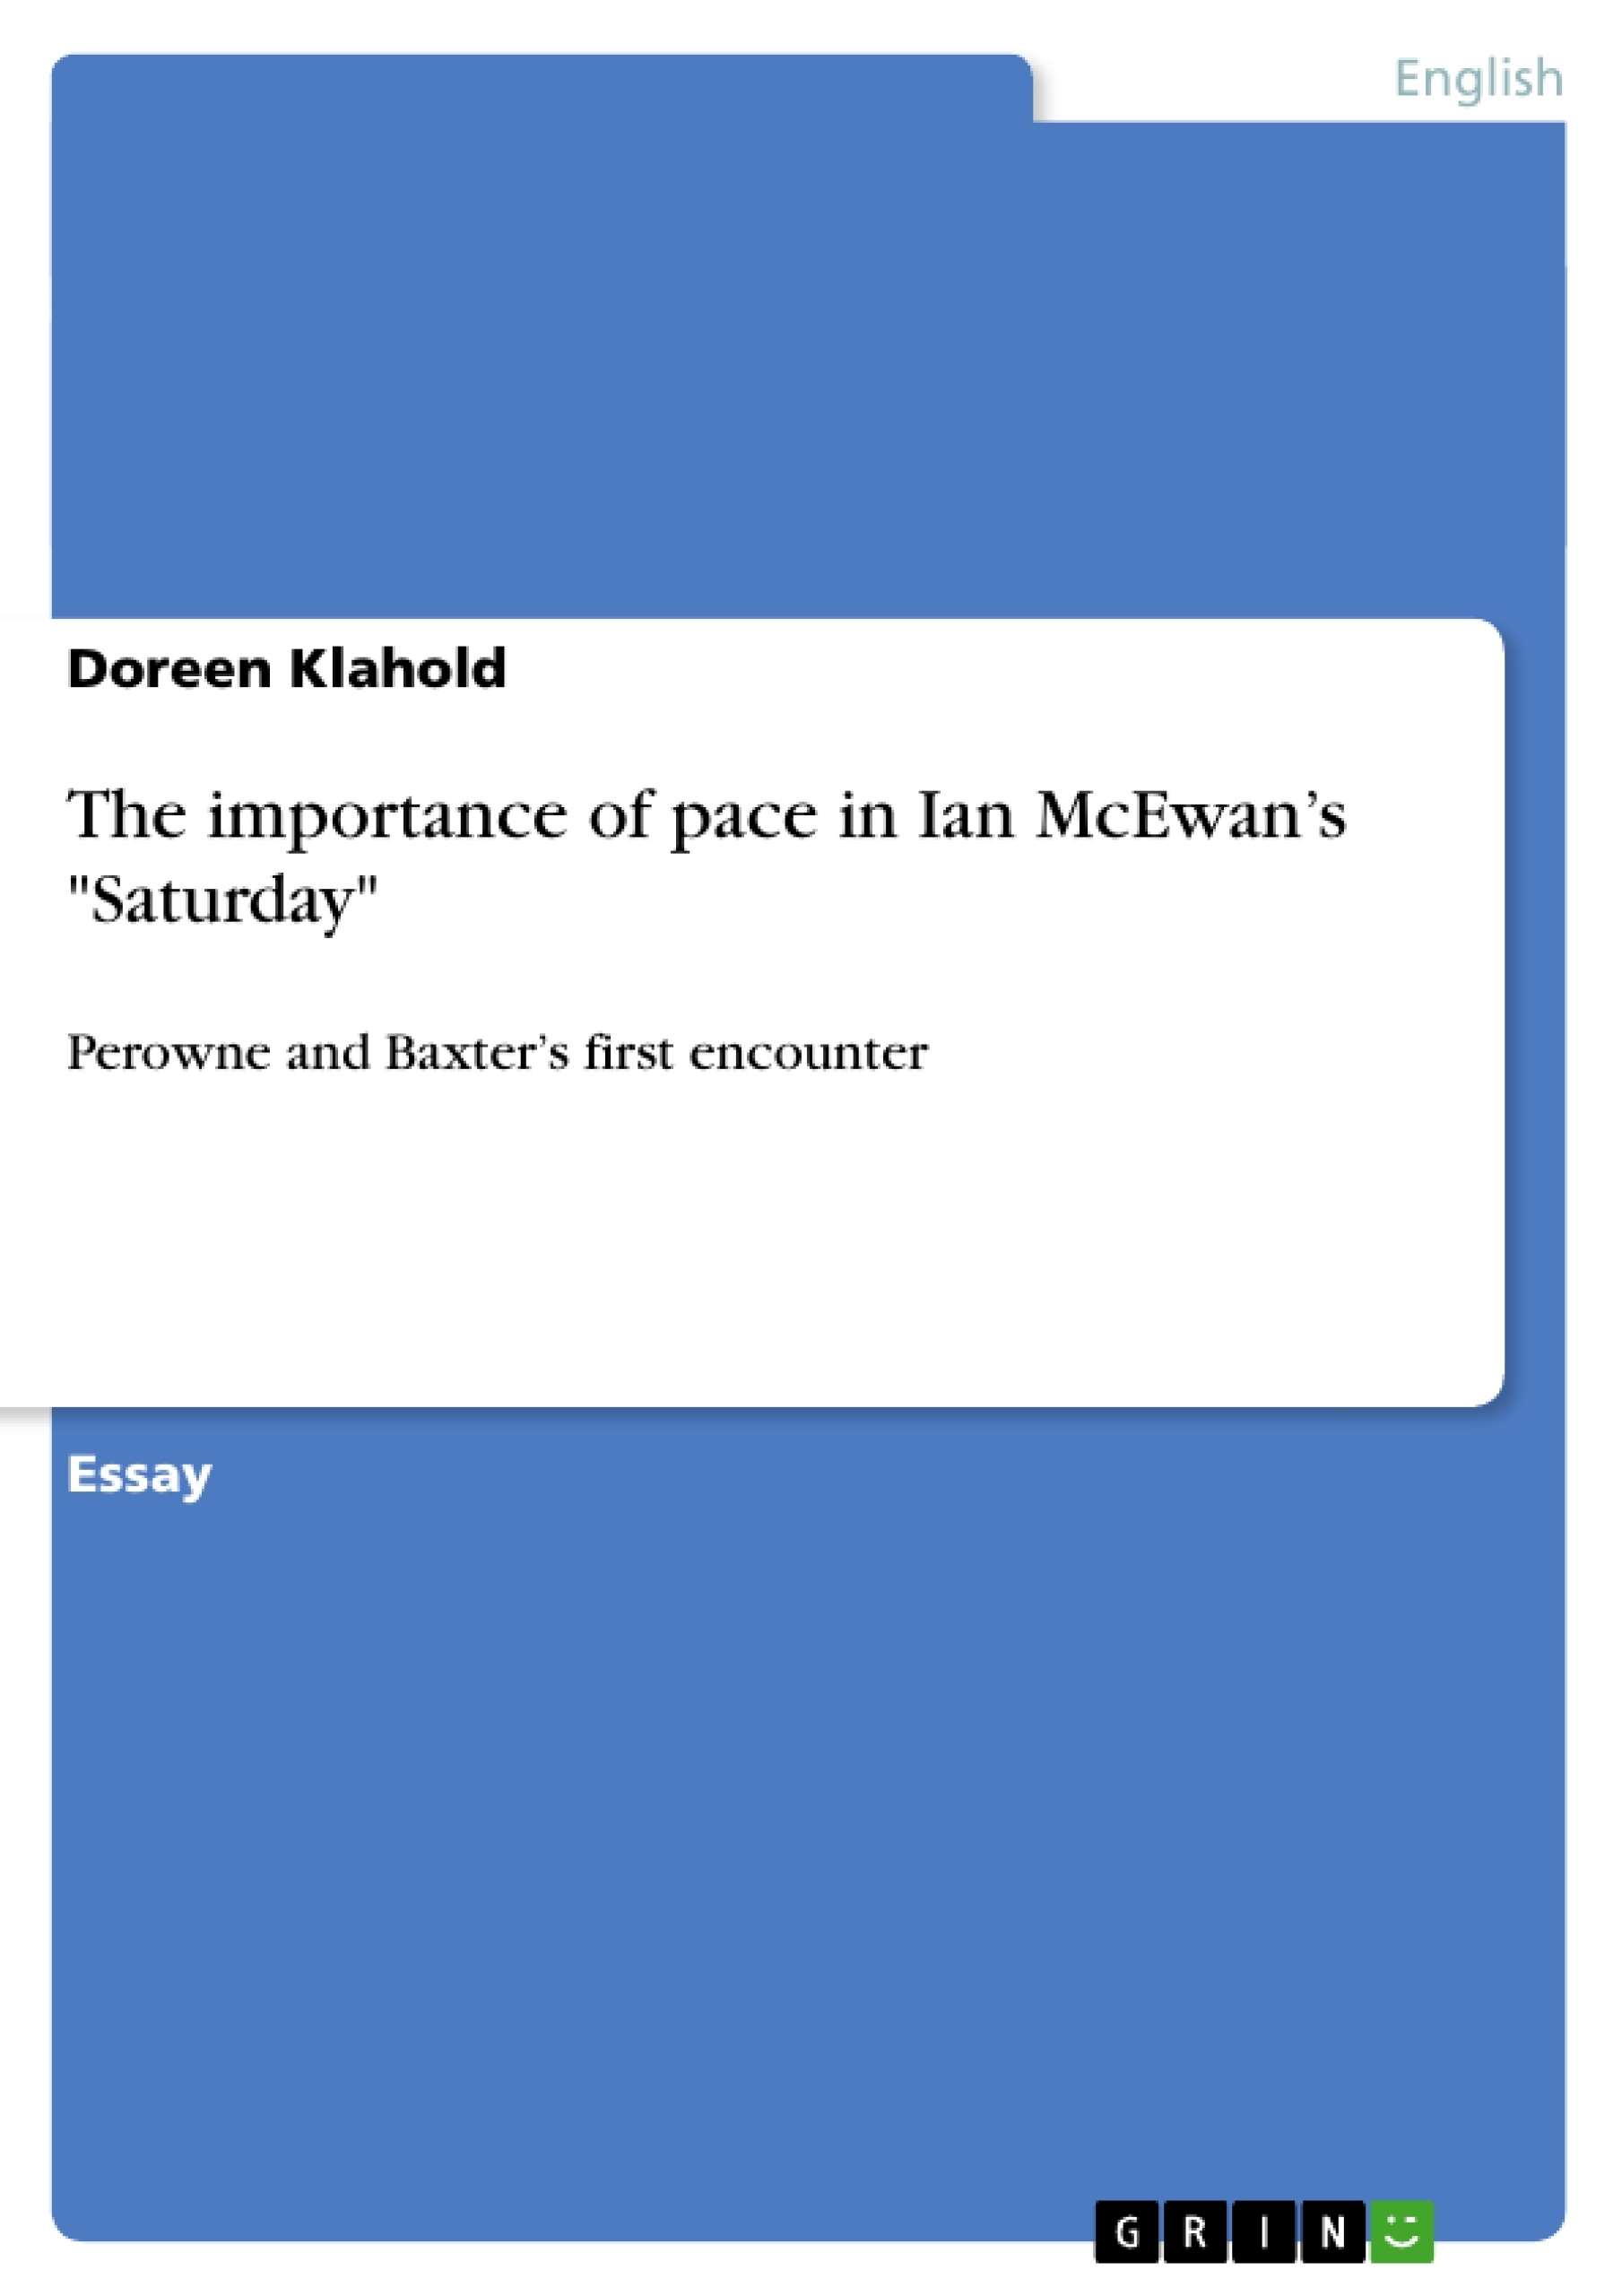 Titre: The importance of pace in Ian McEwan’s "Saturday"